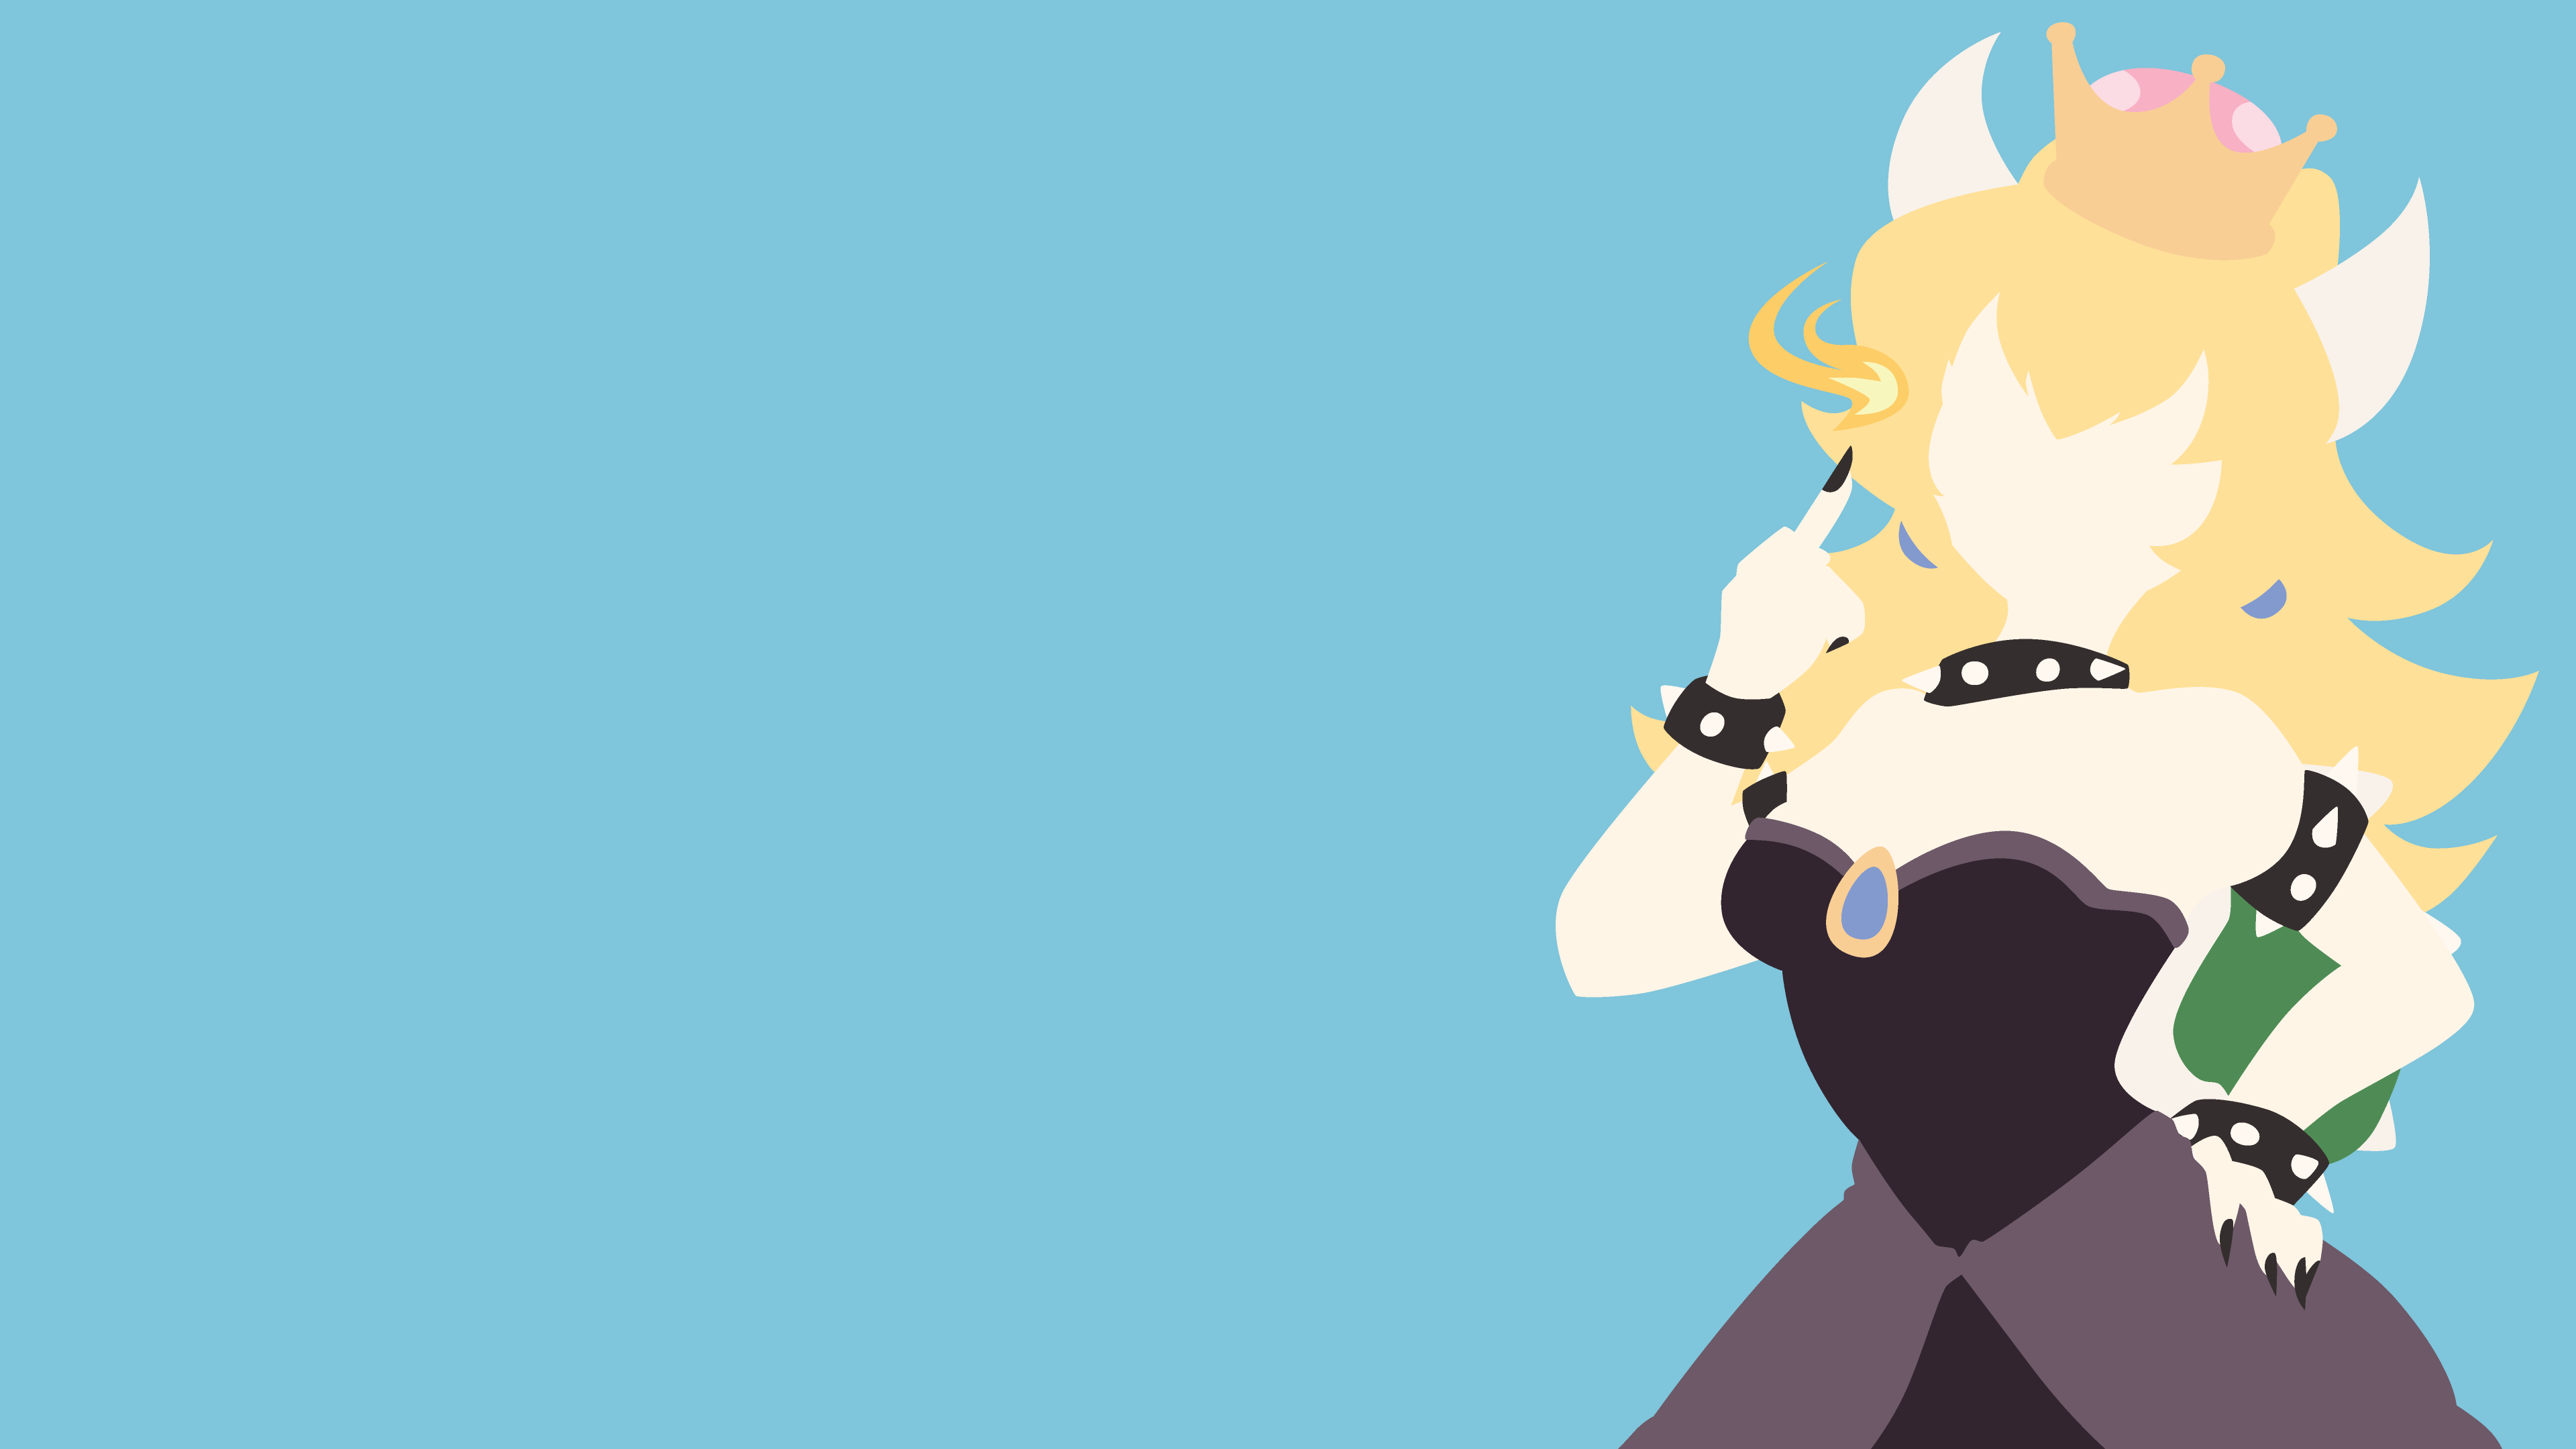 Old bowsette wallpaper  rphonewallpapers